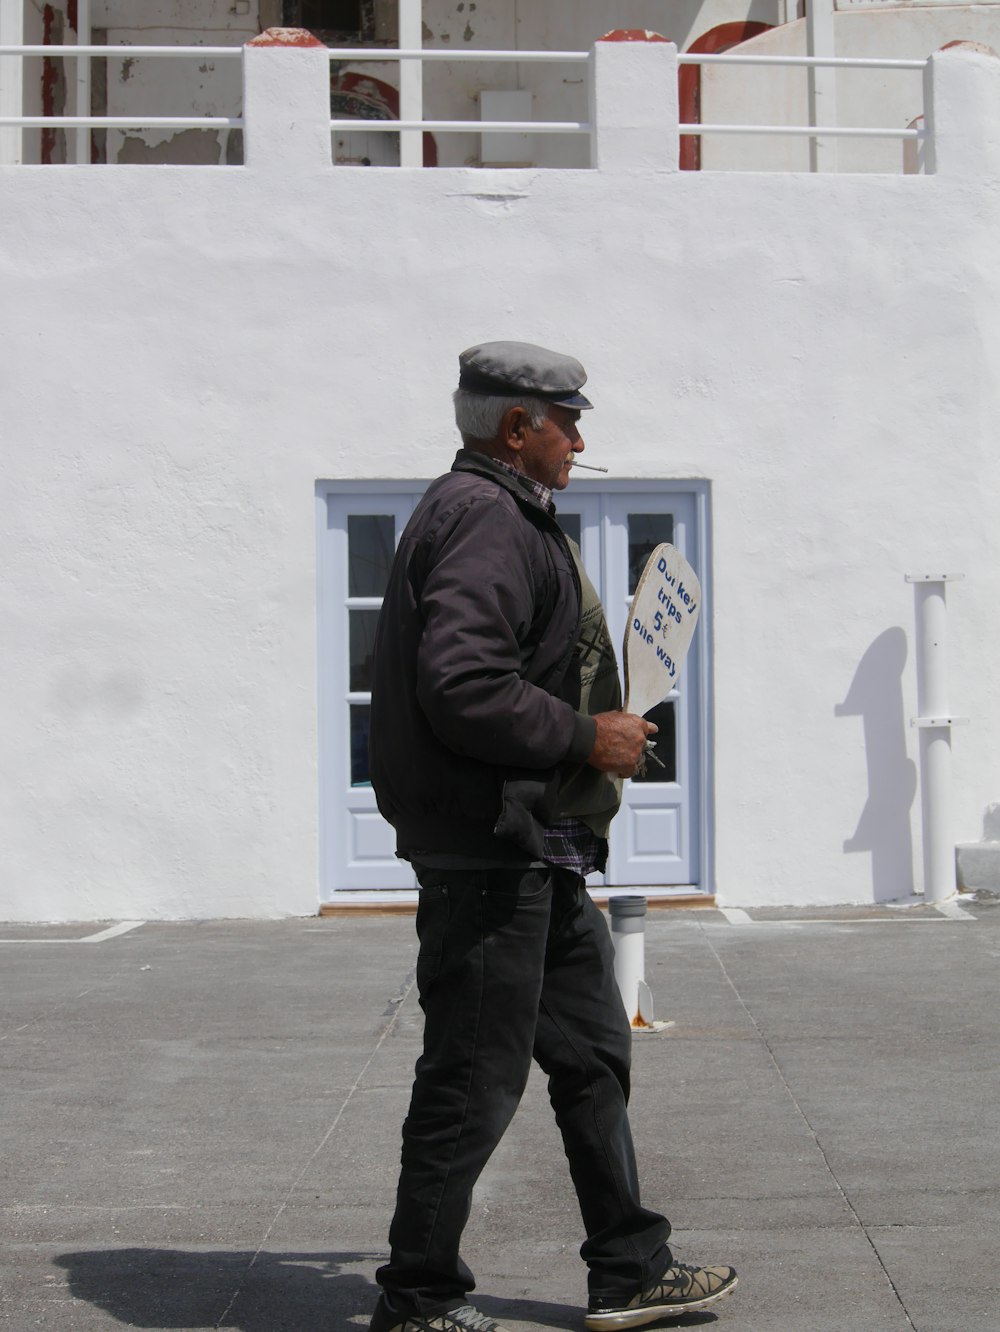 man walking while holding brown sign near white concrete building